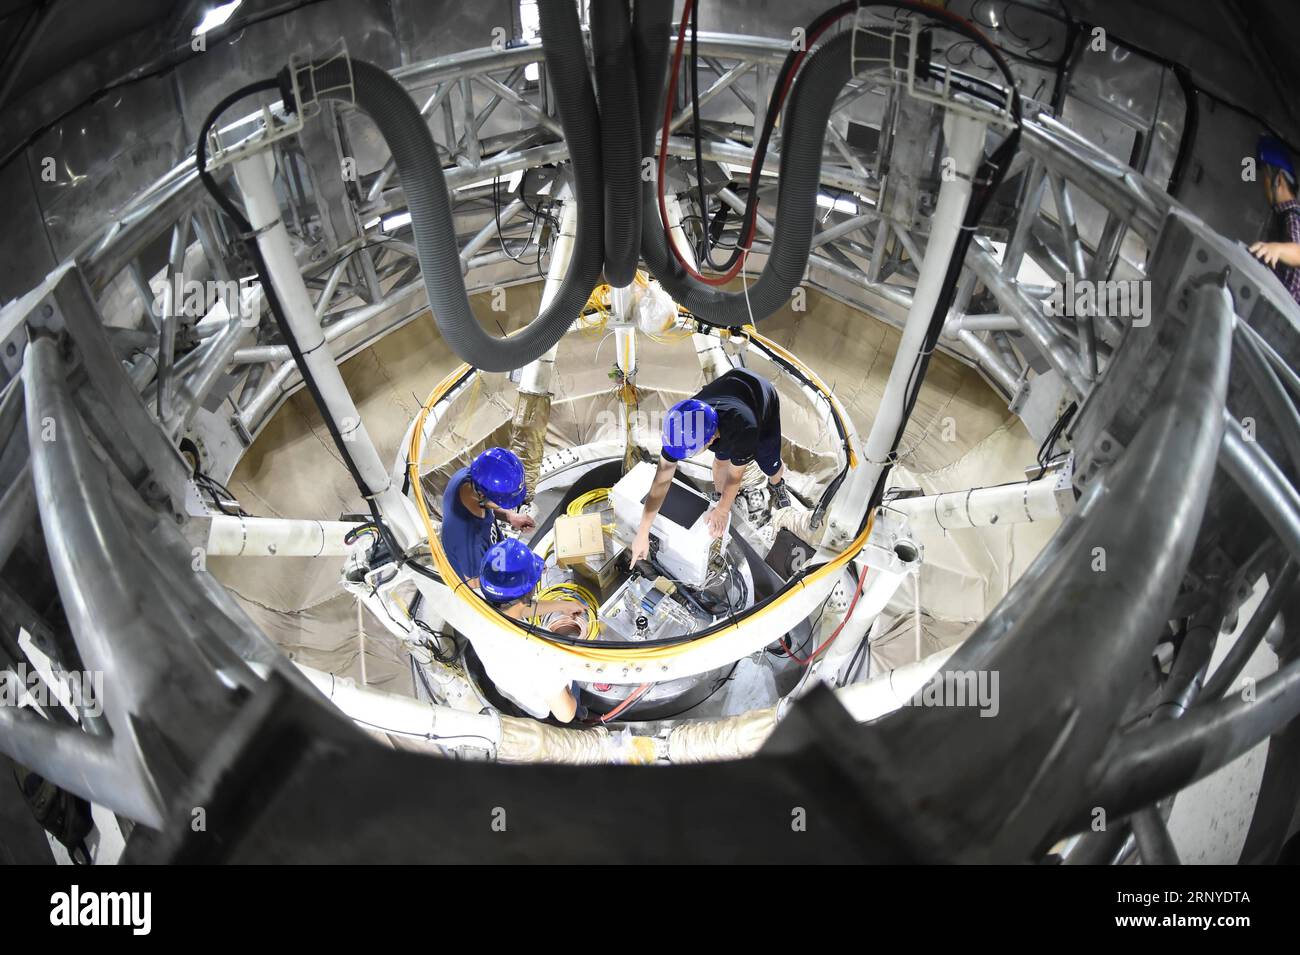 (180313) -- GUIYANG, March 13, 2018 -- File photo taken on Aug. 10, 2017, shows staff members working in the feed cabin of the Five-hundred-meter Aperture Spherical Radio Telescope (FAST) in Pingtang County, southwest China s Guizhou Province. China s FAST, the world s largest single-dish radio telescope, has discovered 11 new pulsars so far, the National Astronomical Observatories of China (NAOC) said Tuesday. )(wsw) CHINA-GUIZHOU-FAST-11 NEW PULSARS (CN) OuxDongqu PUBLICATIONxNOTxINxCHN Stock Photo